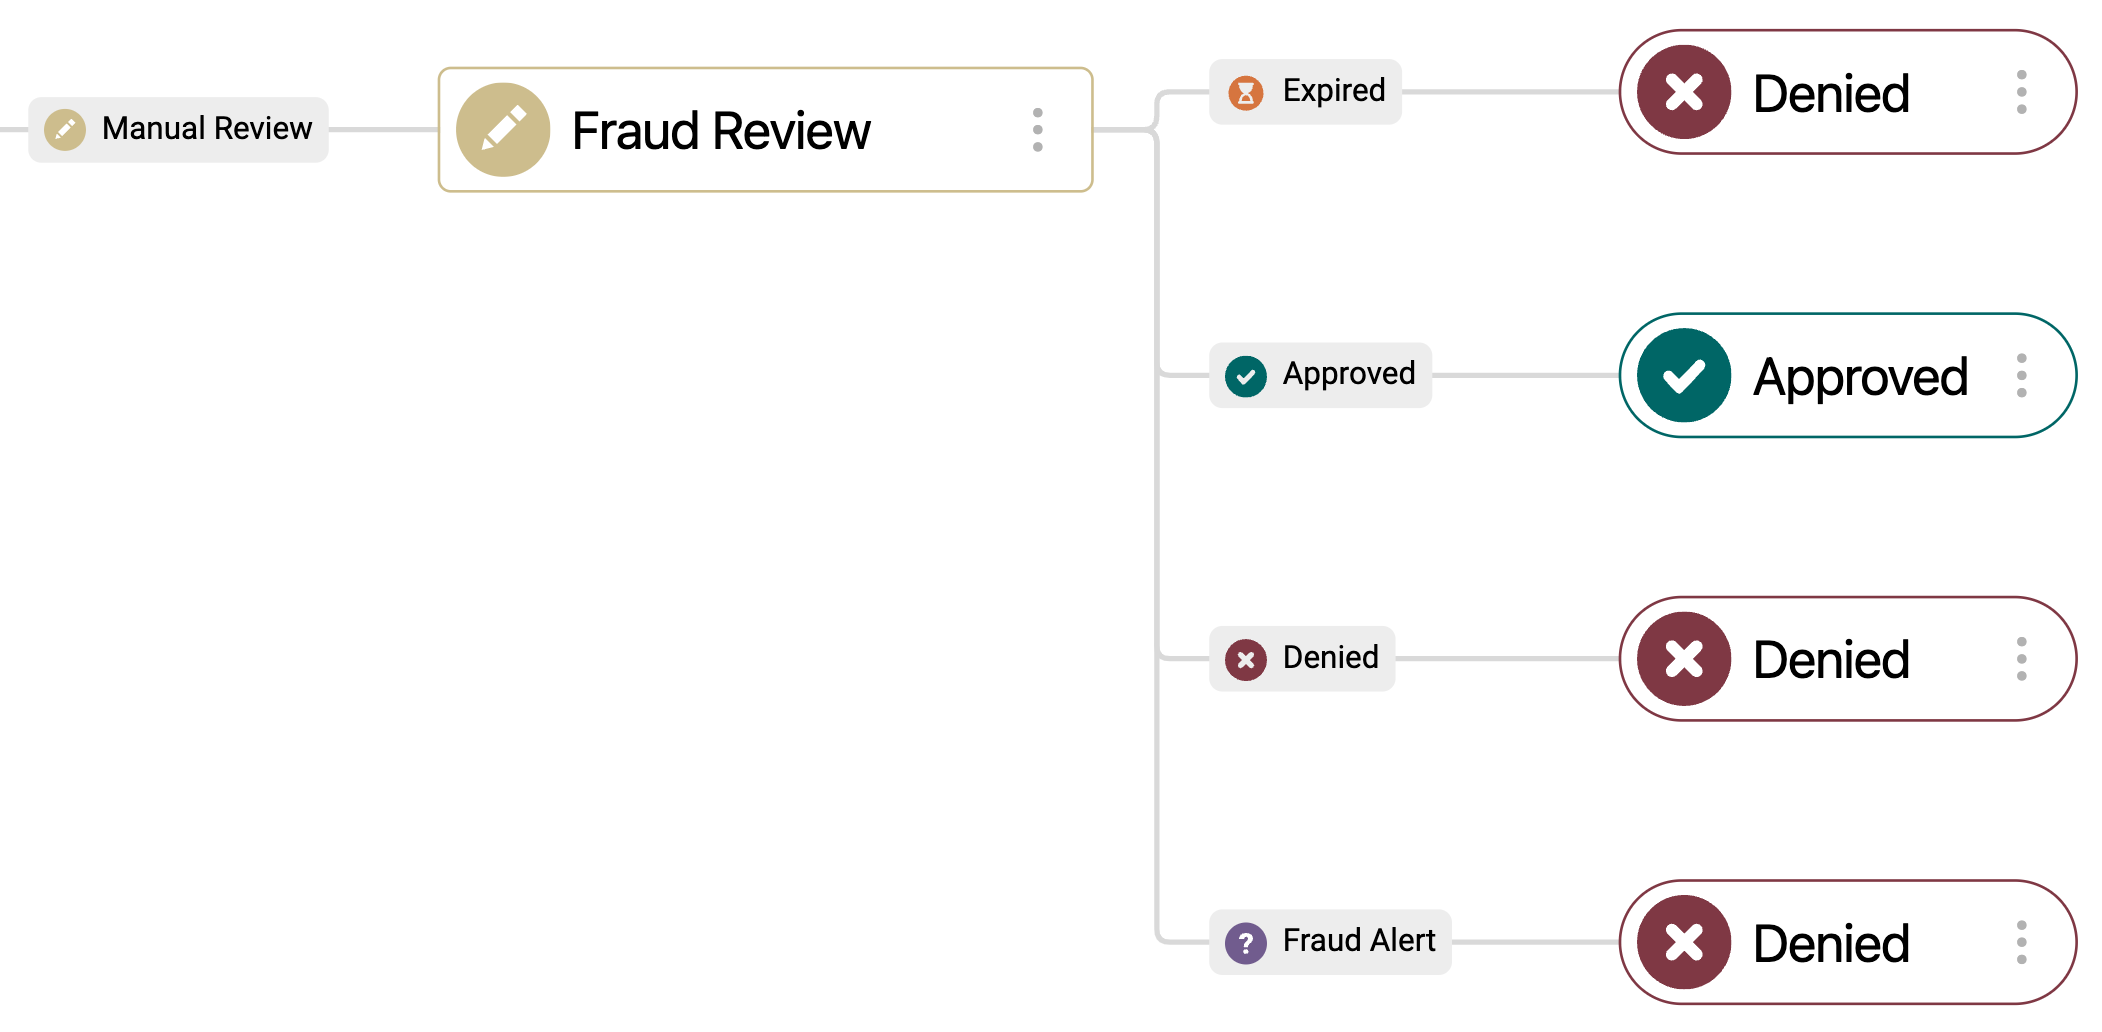 Fraud_Review_-_Application_Outcomes.png